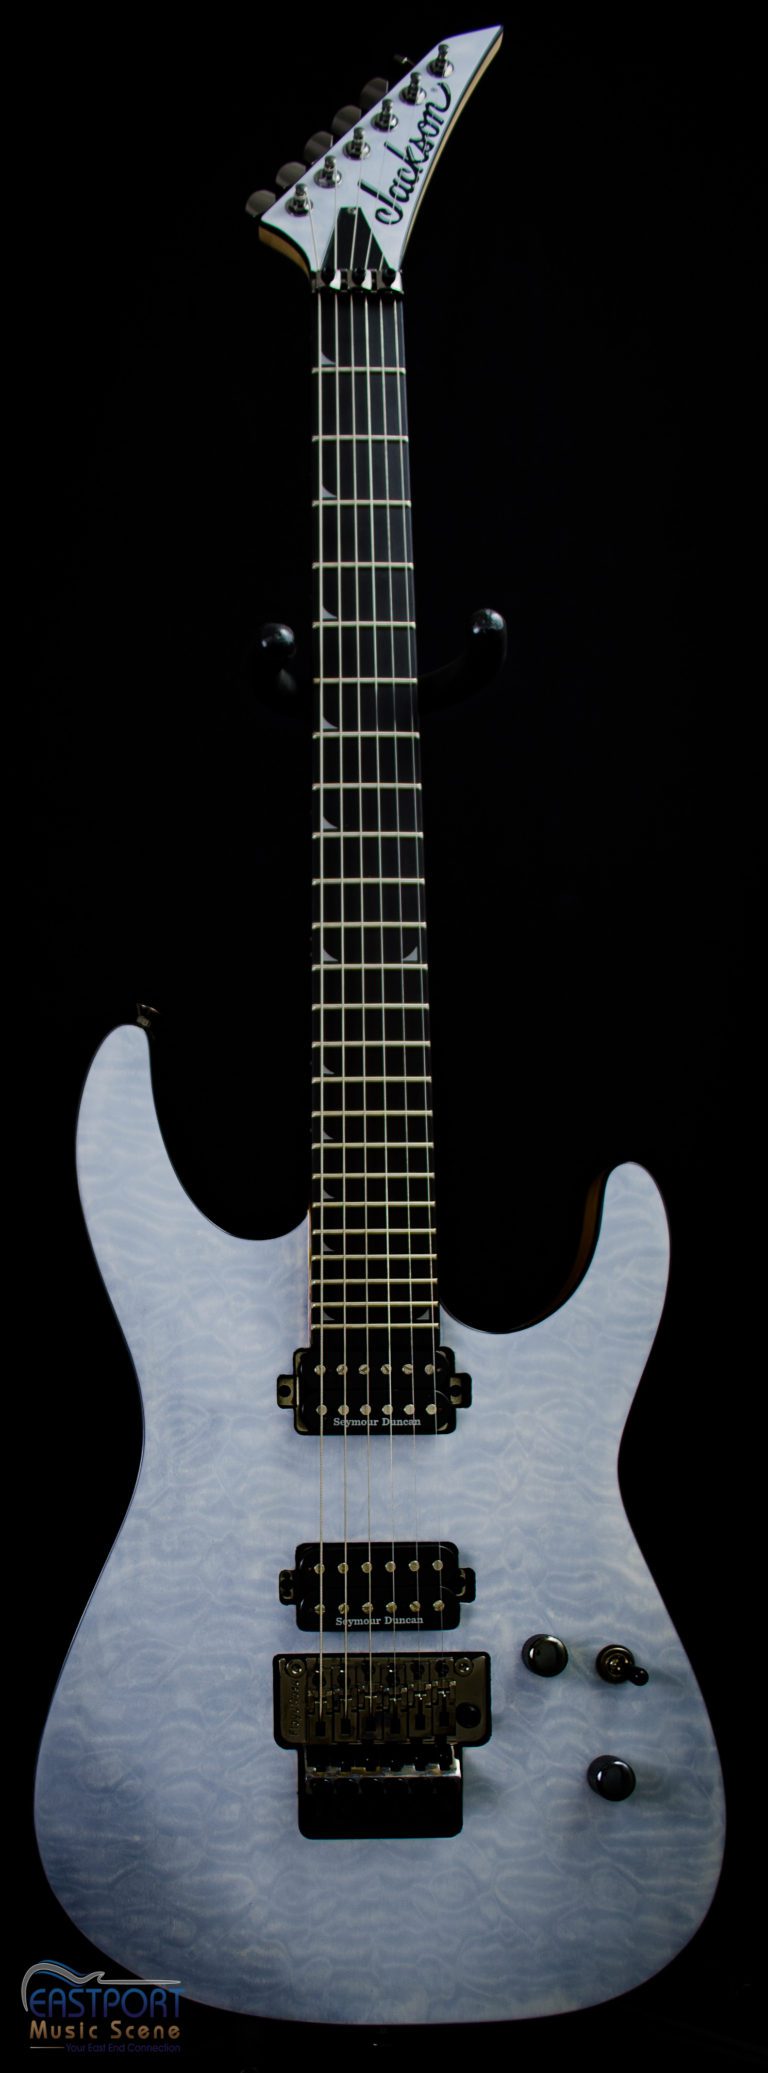 A white electric guitar with black strings and a black pick guard.